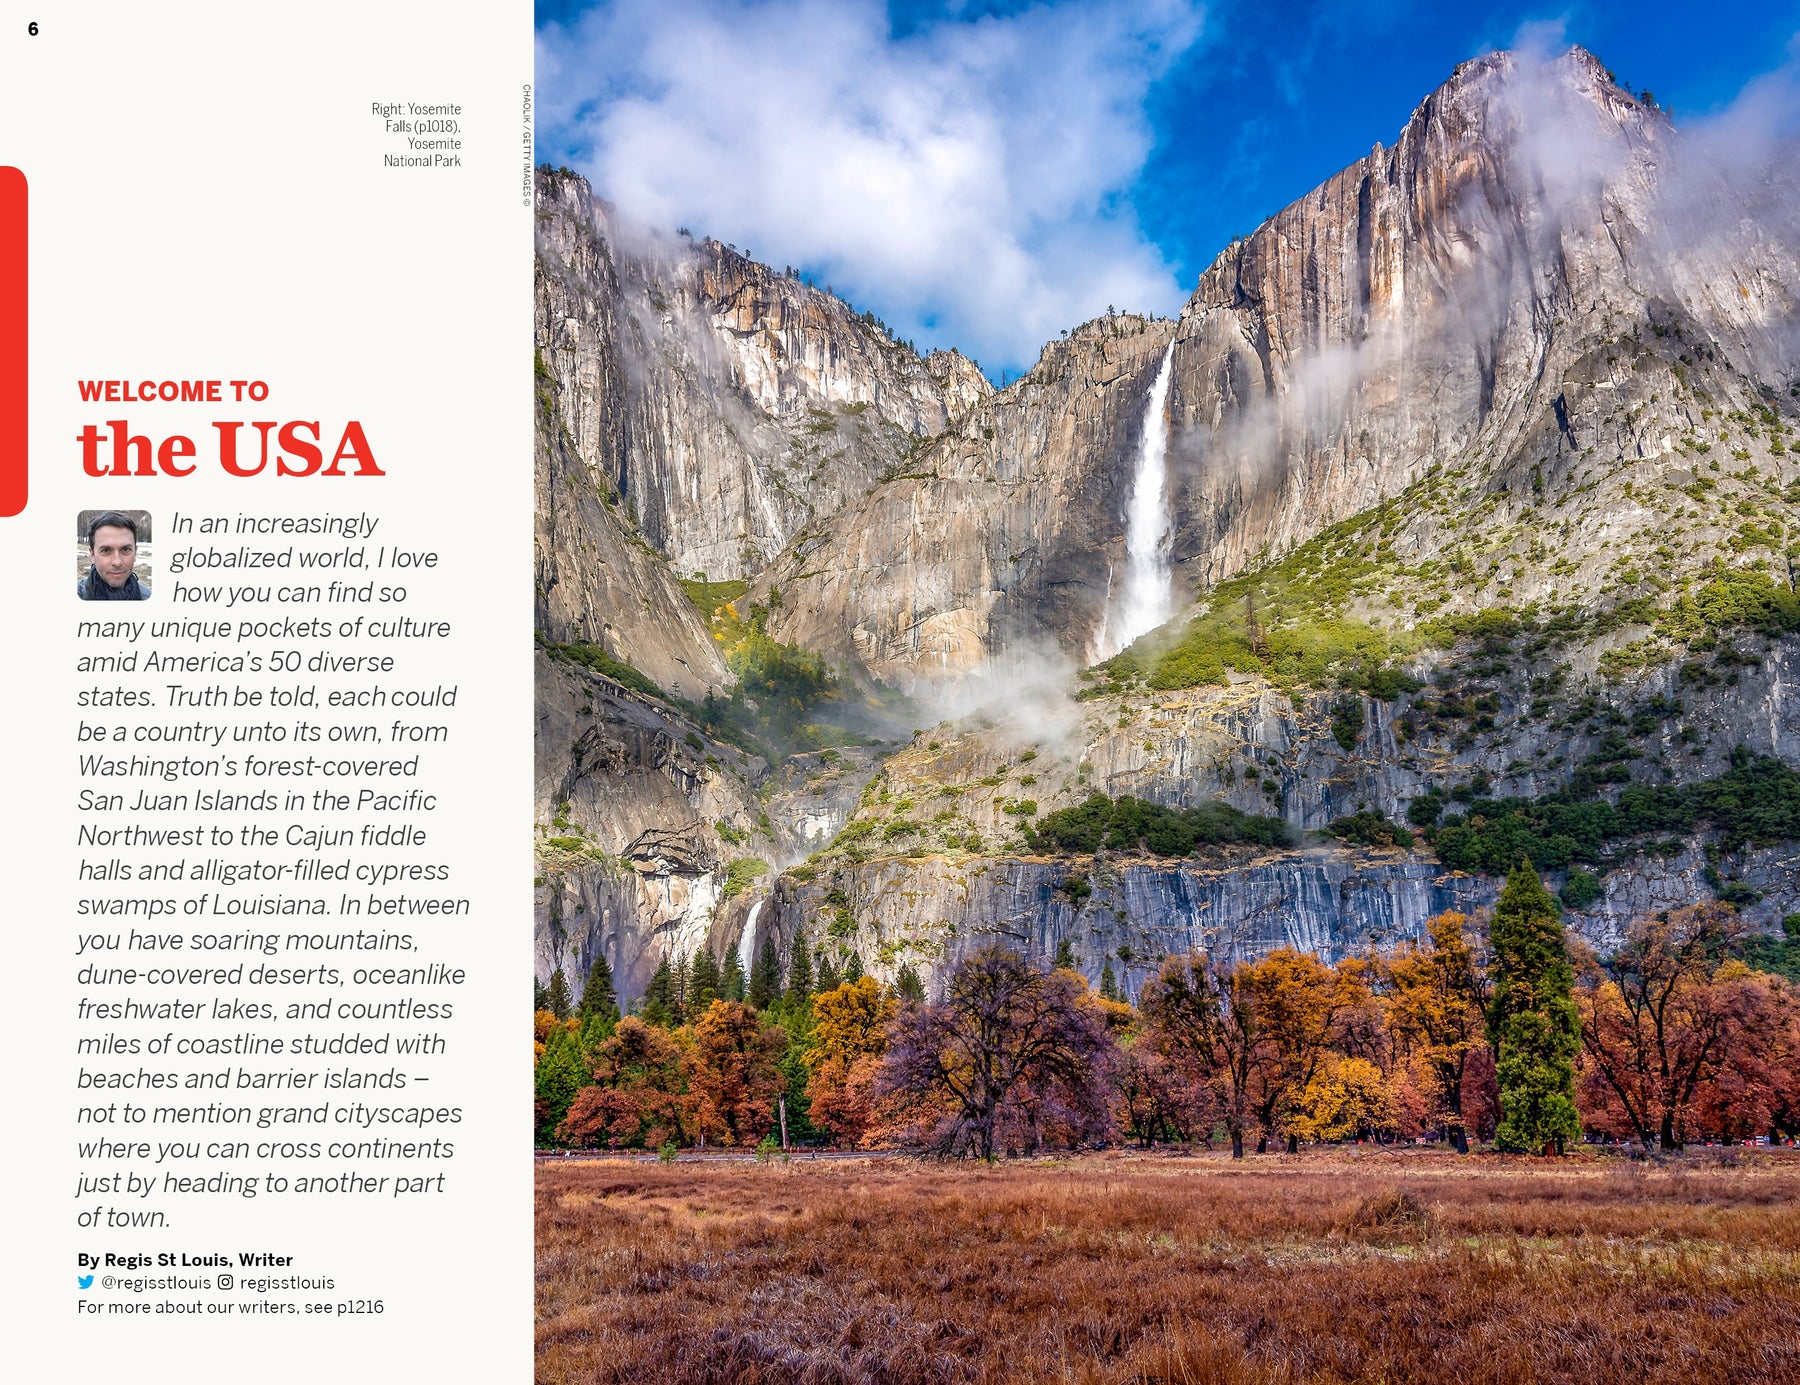 USA Lonely Planet